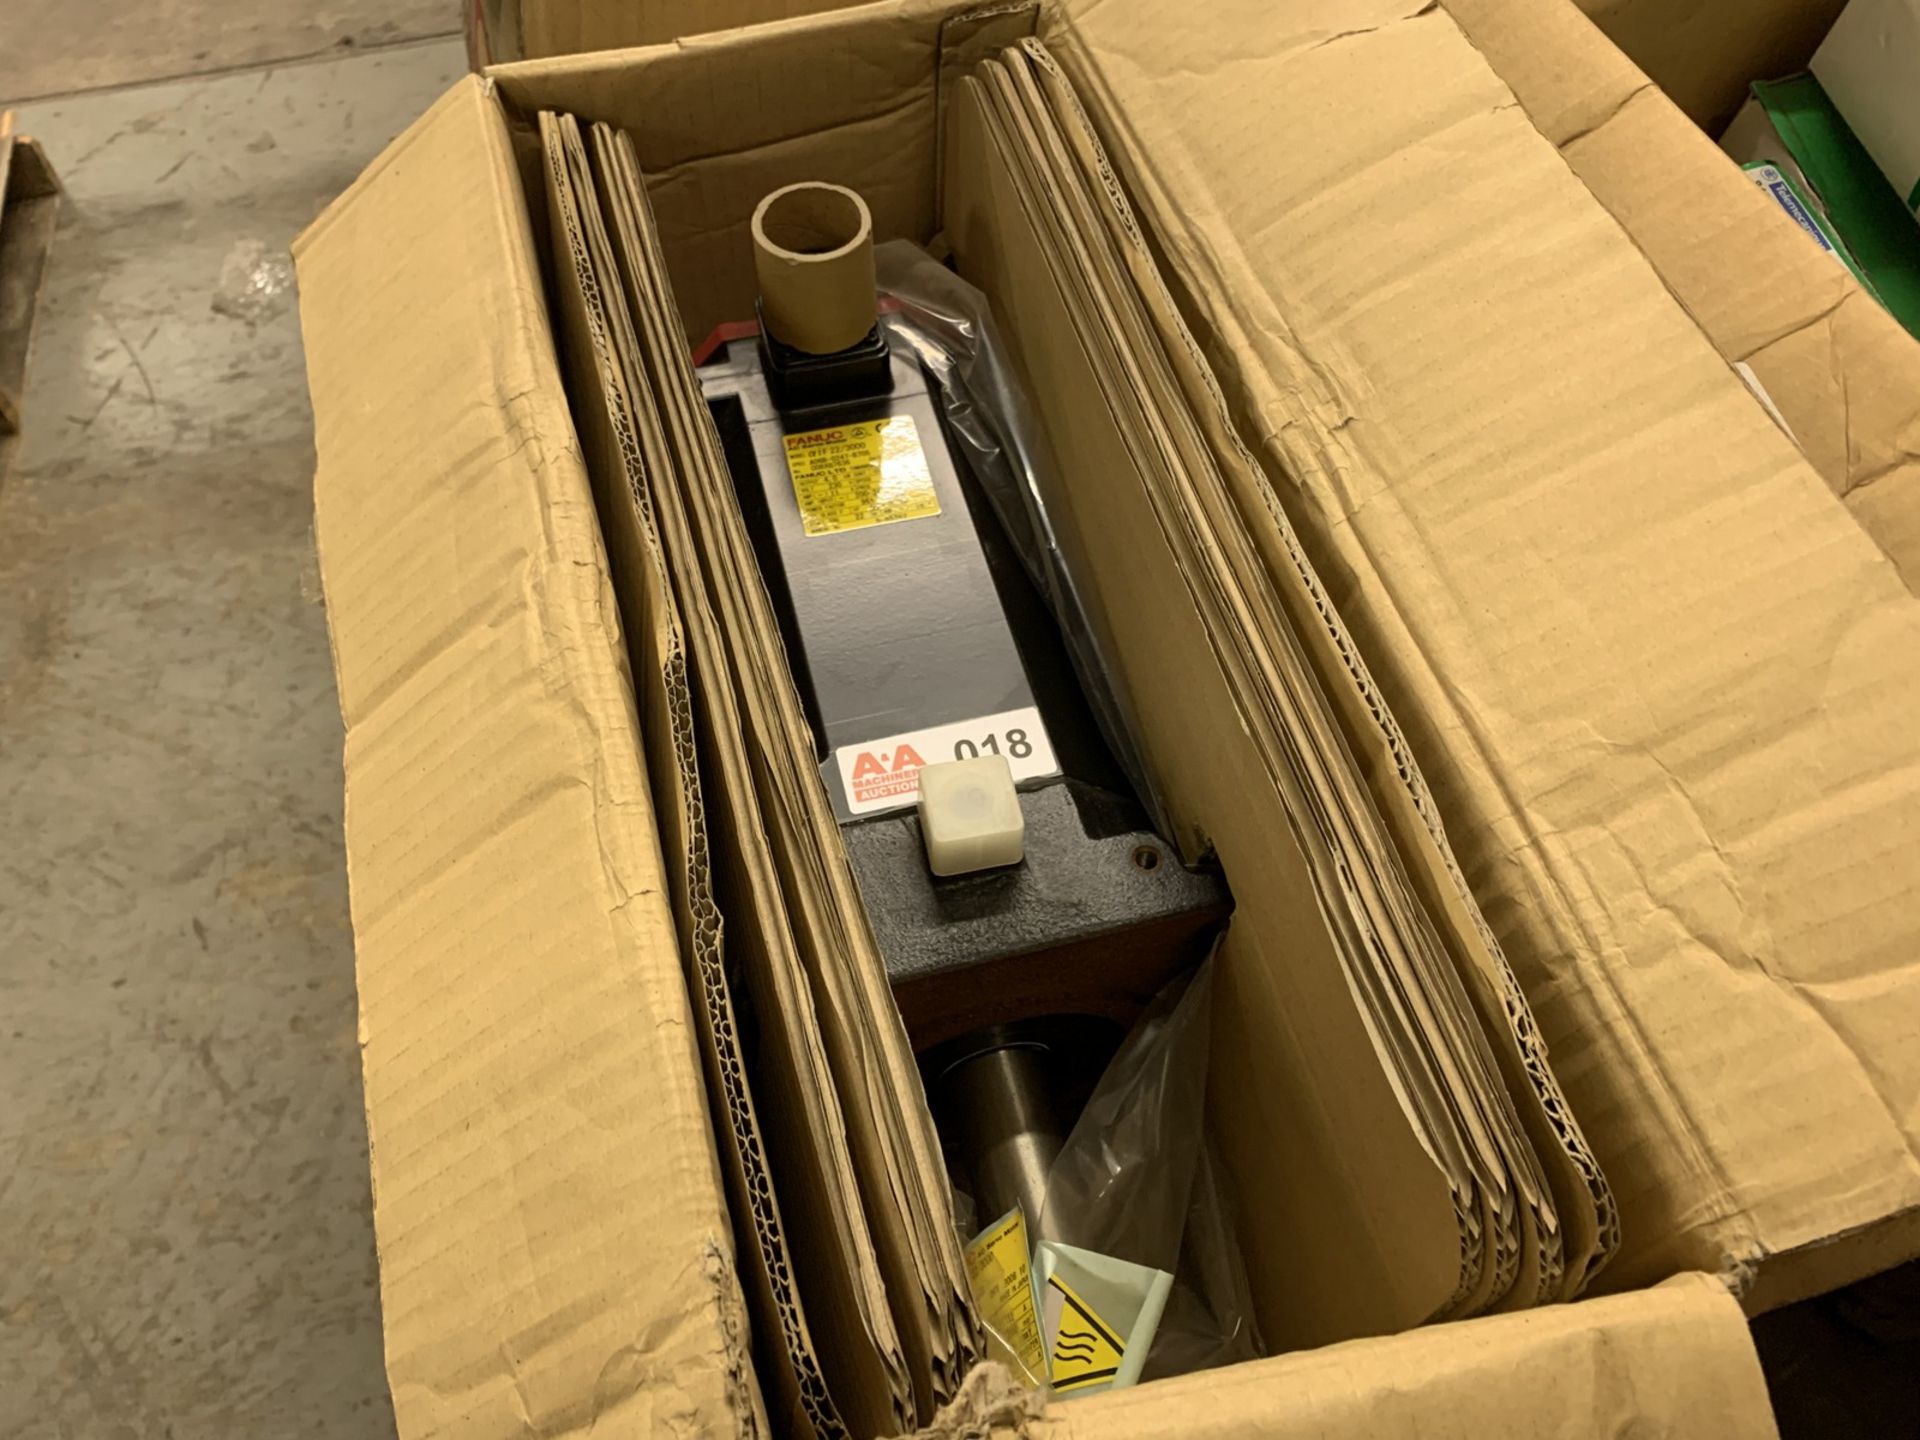 Fanuc Mdl. aif22/3000 AC Servo Motor in Box (All Items MUST be Removed by Thursday, December 19,